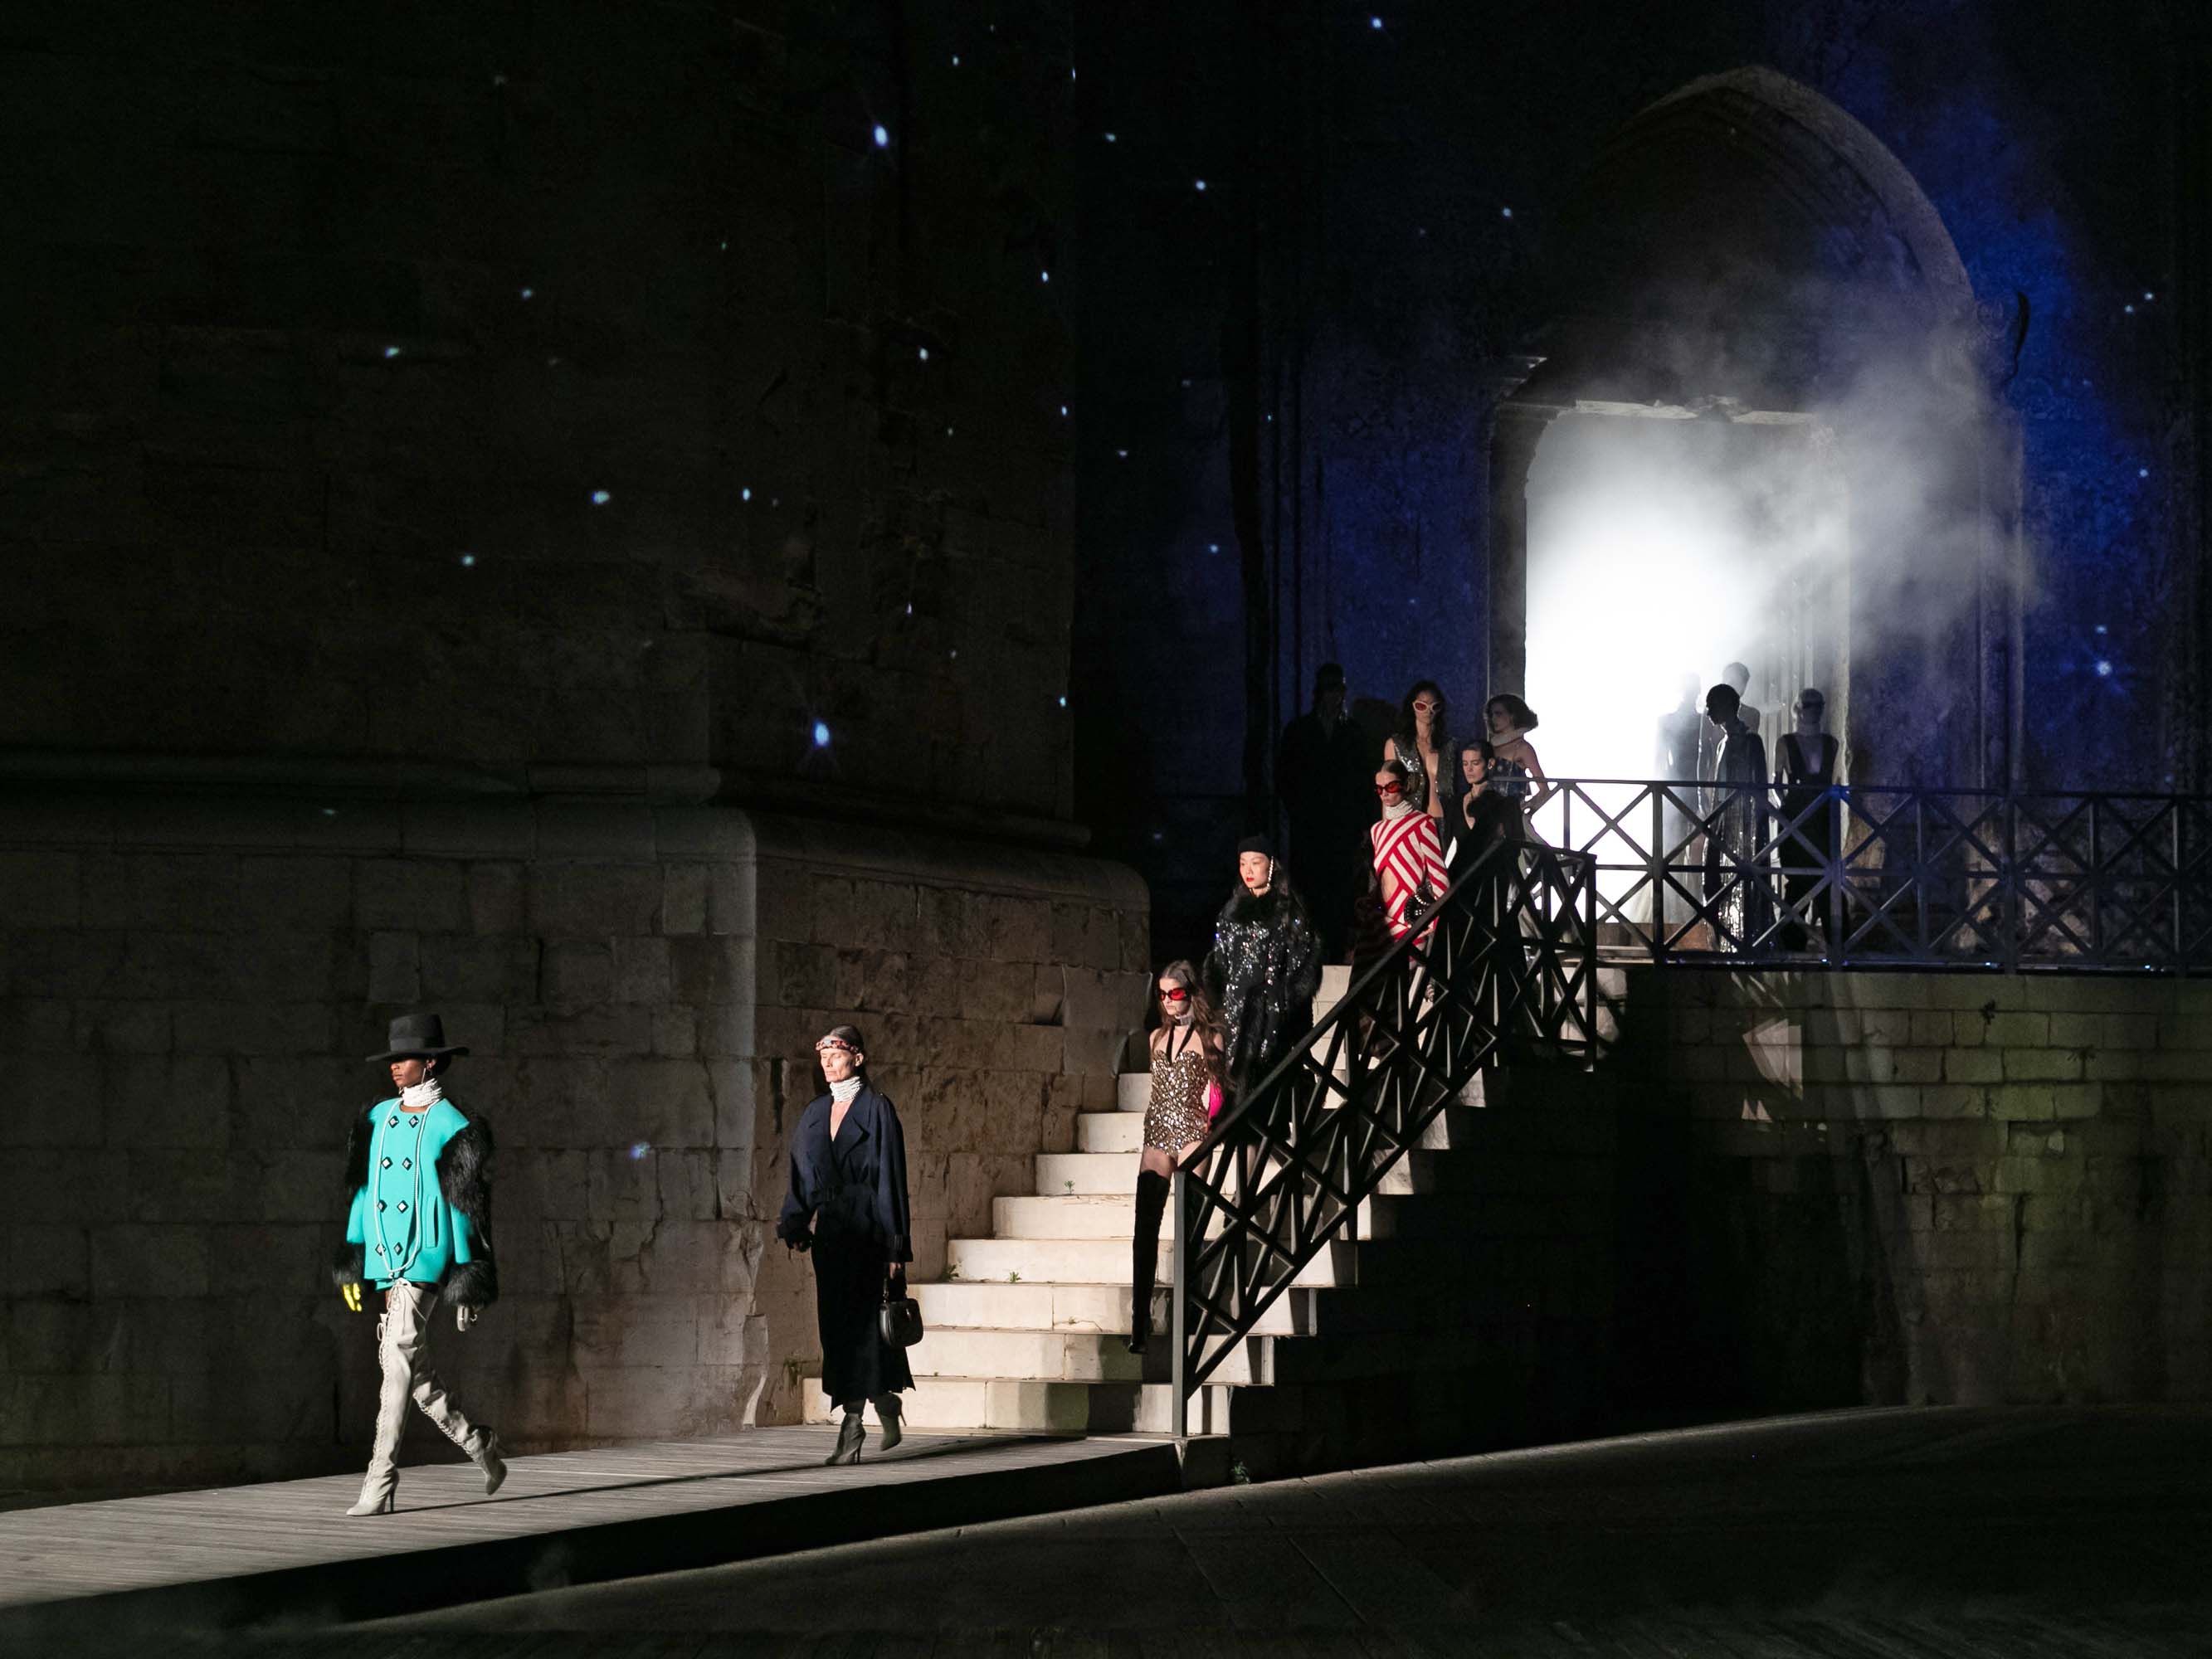 Highlights from Gucci's Cosmogonie show